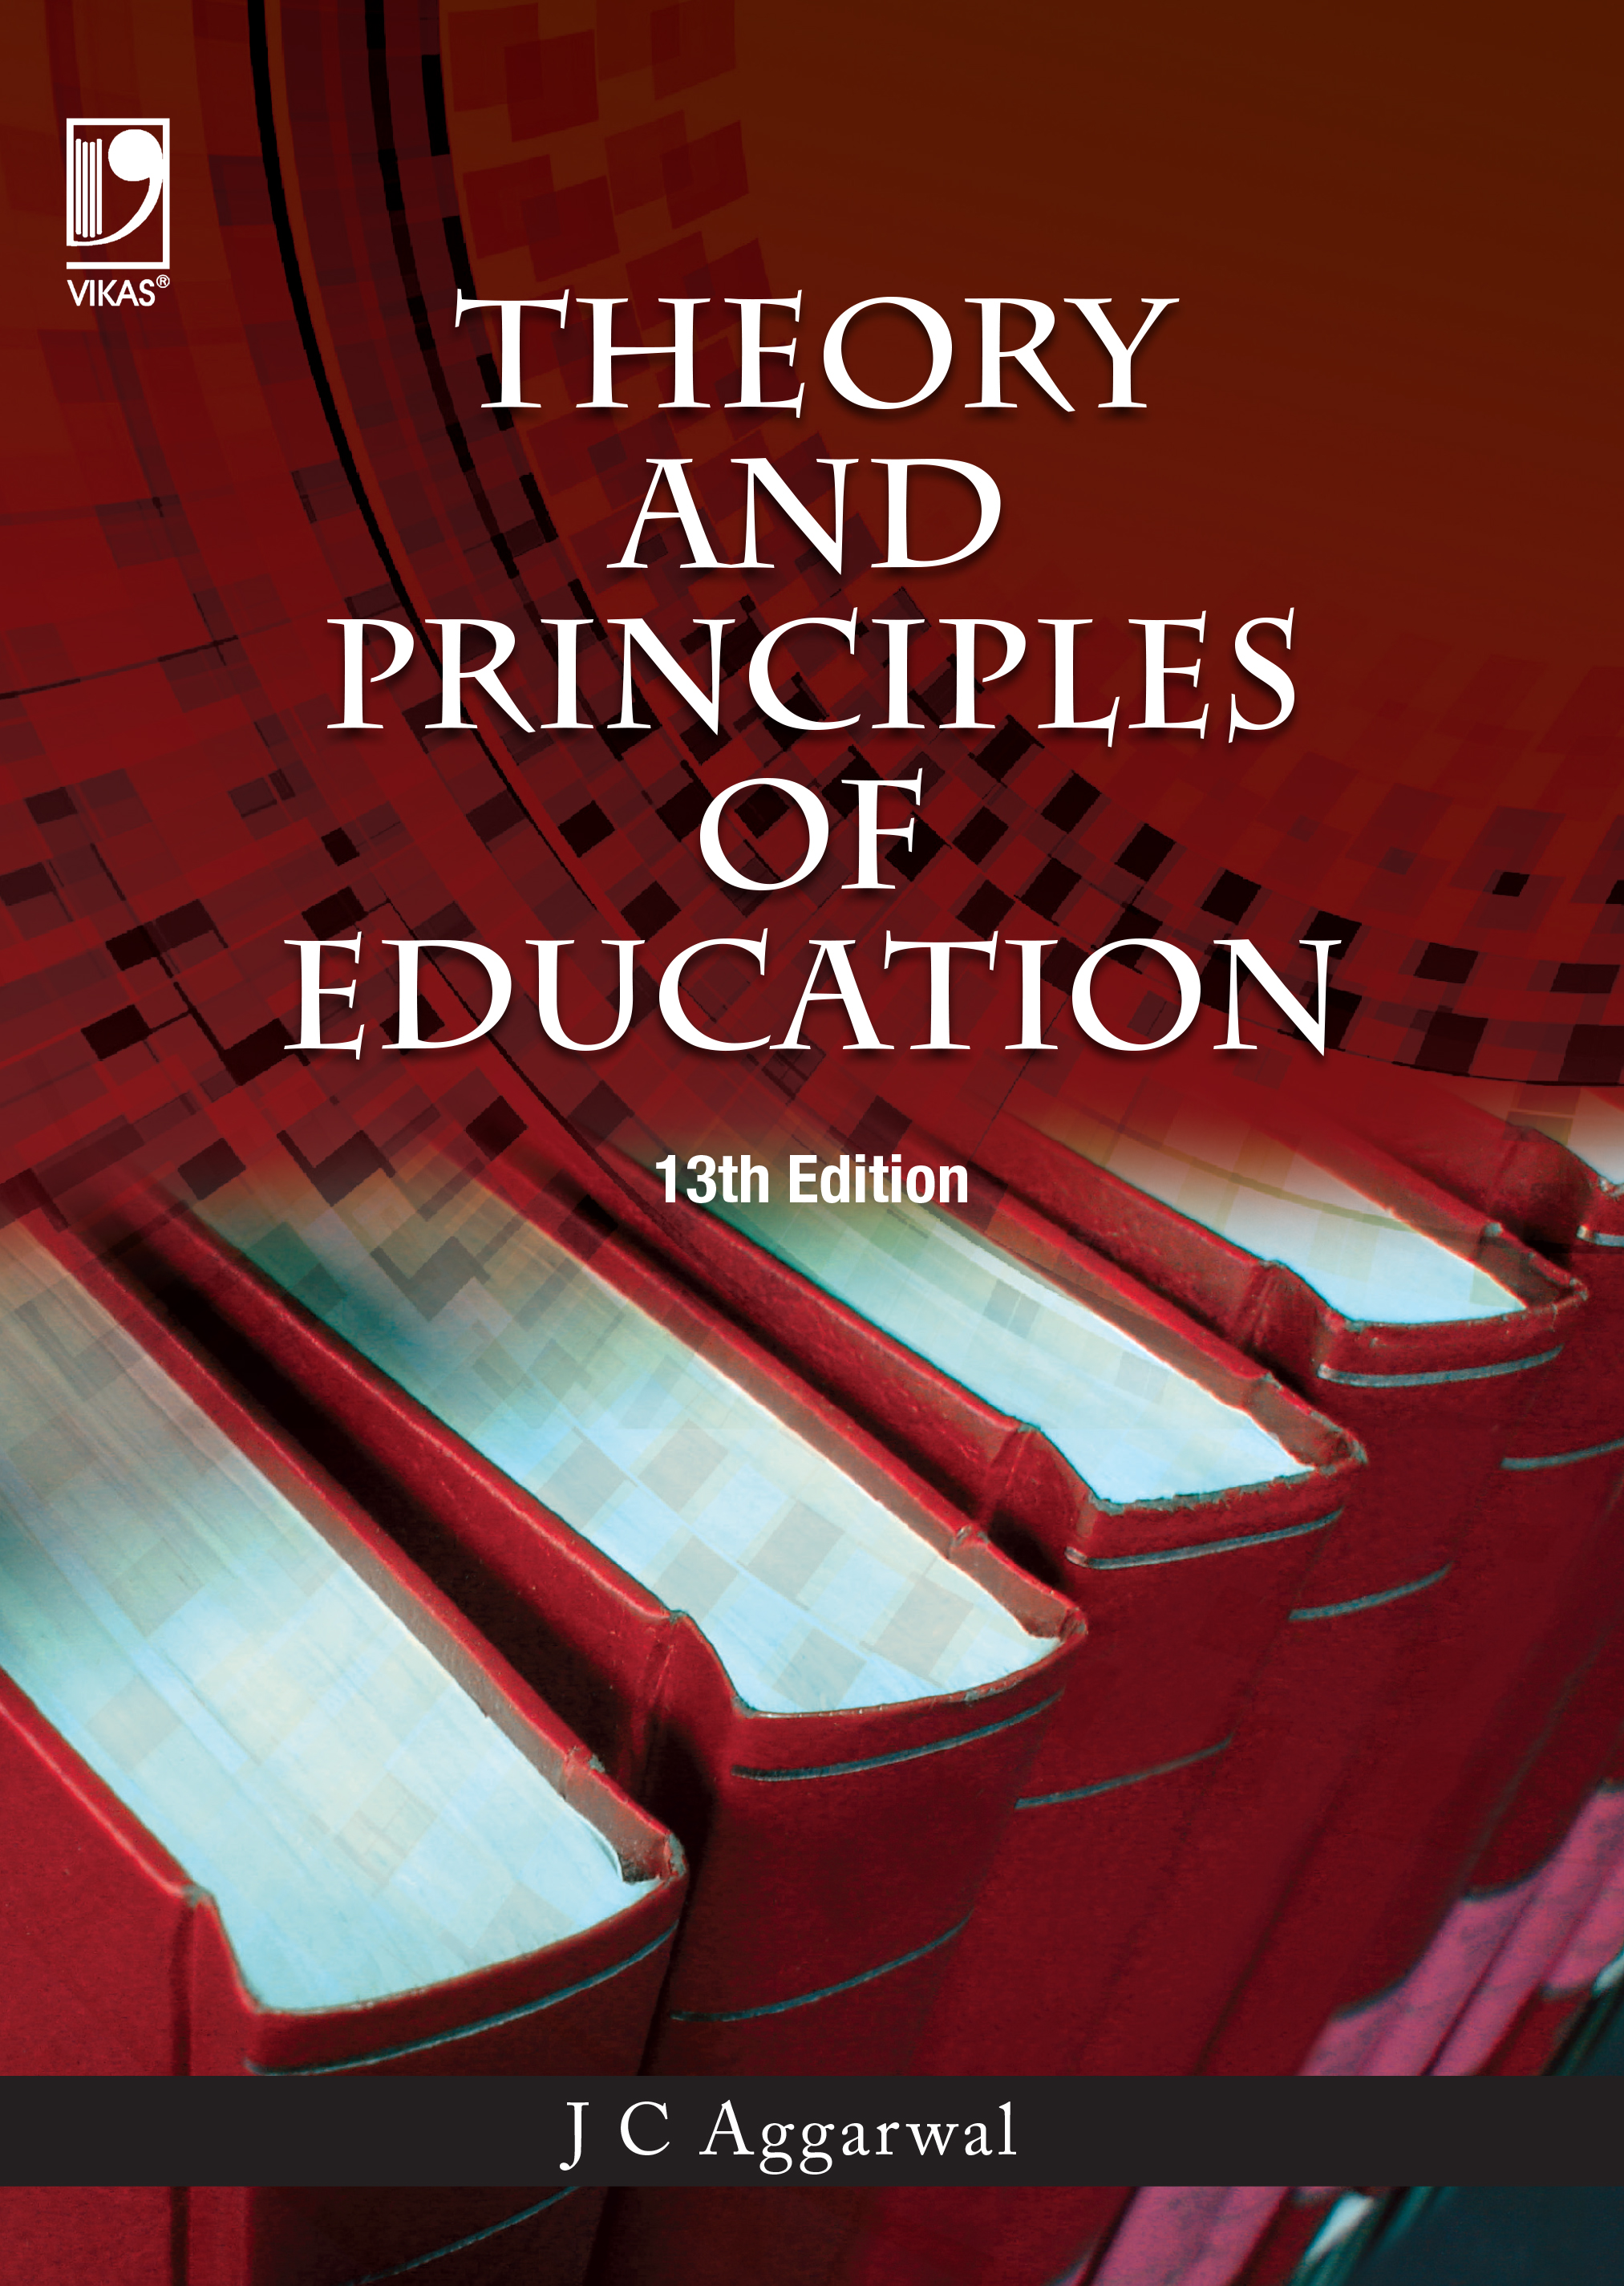 Theory and Principles of Education